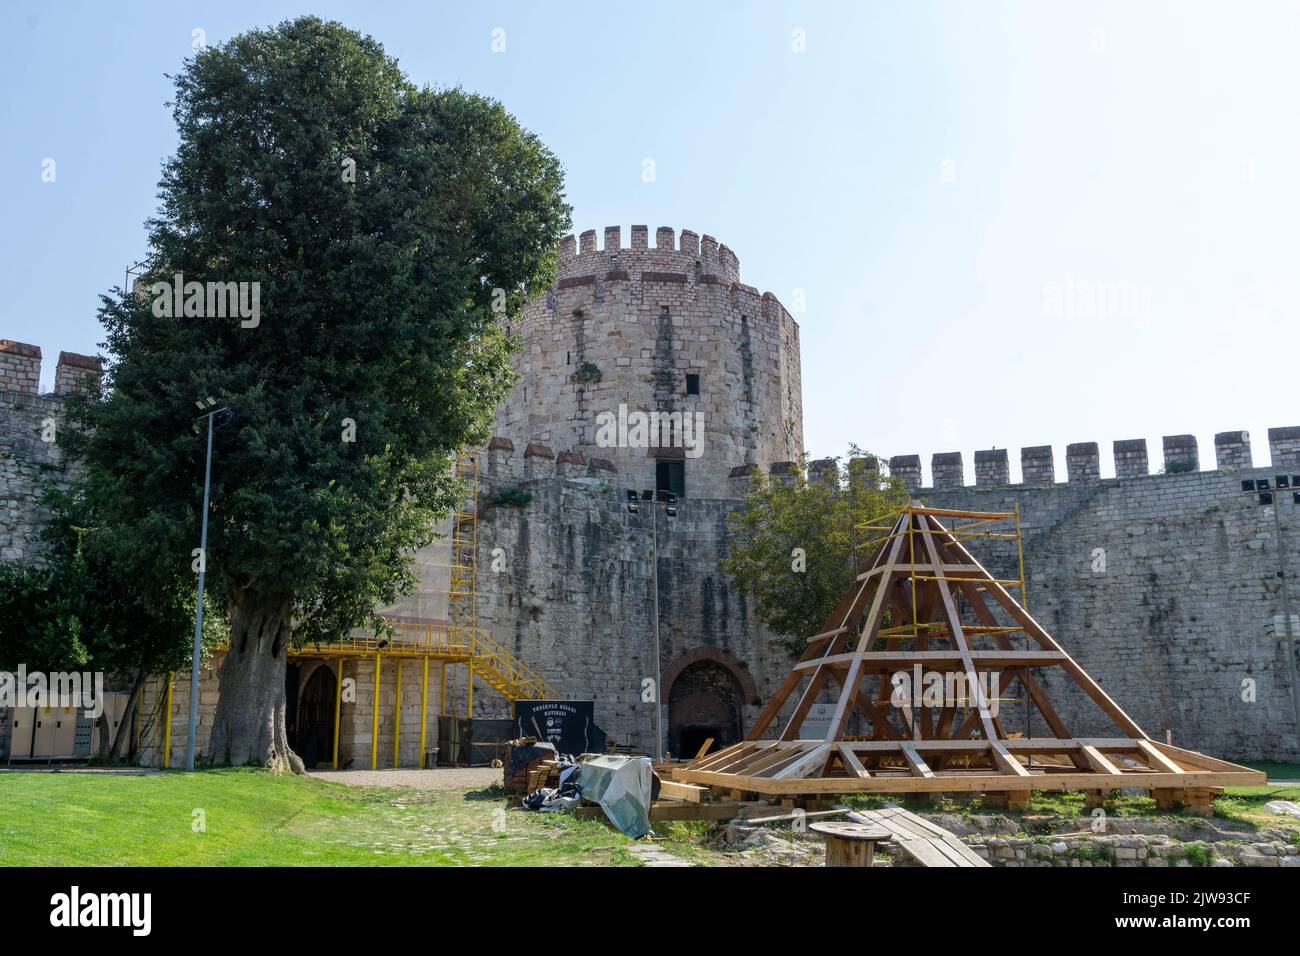 September 2, 2022: Views of the interior, courtyard and surroundings of the Yedikule Fortress Museum, fortified historic structure which was once used as a dungeon, located in the Yedikule neighbourhood of Fatih, in Istanbul, Turkey on September 2, 2022. Built in 1458 on the commission of Ottoman Sultan Mehmed II, the seven-tower complex was created by adding three new towers and fully enclosing a section of the ancient Walls of Constantinople, including the two twin towers that originally constituted the triumphal Golden Gate built by Roman Emperors Theodosius I and Theodosius II. (Credit Ima Stock Photo